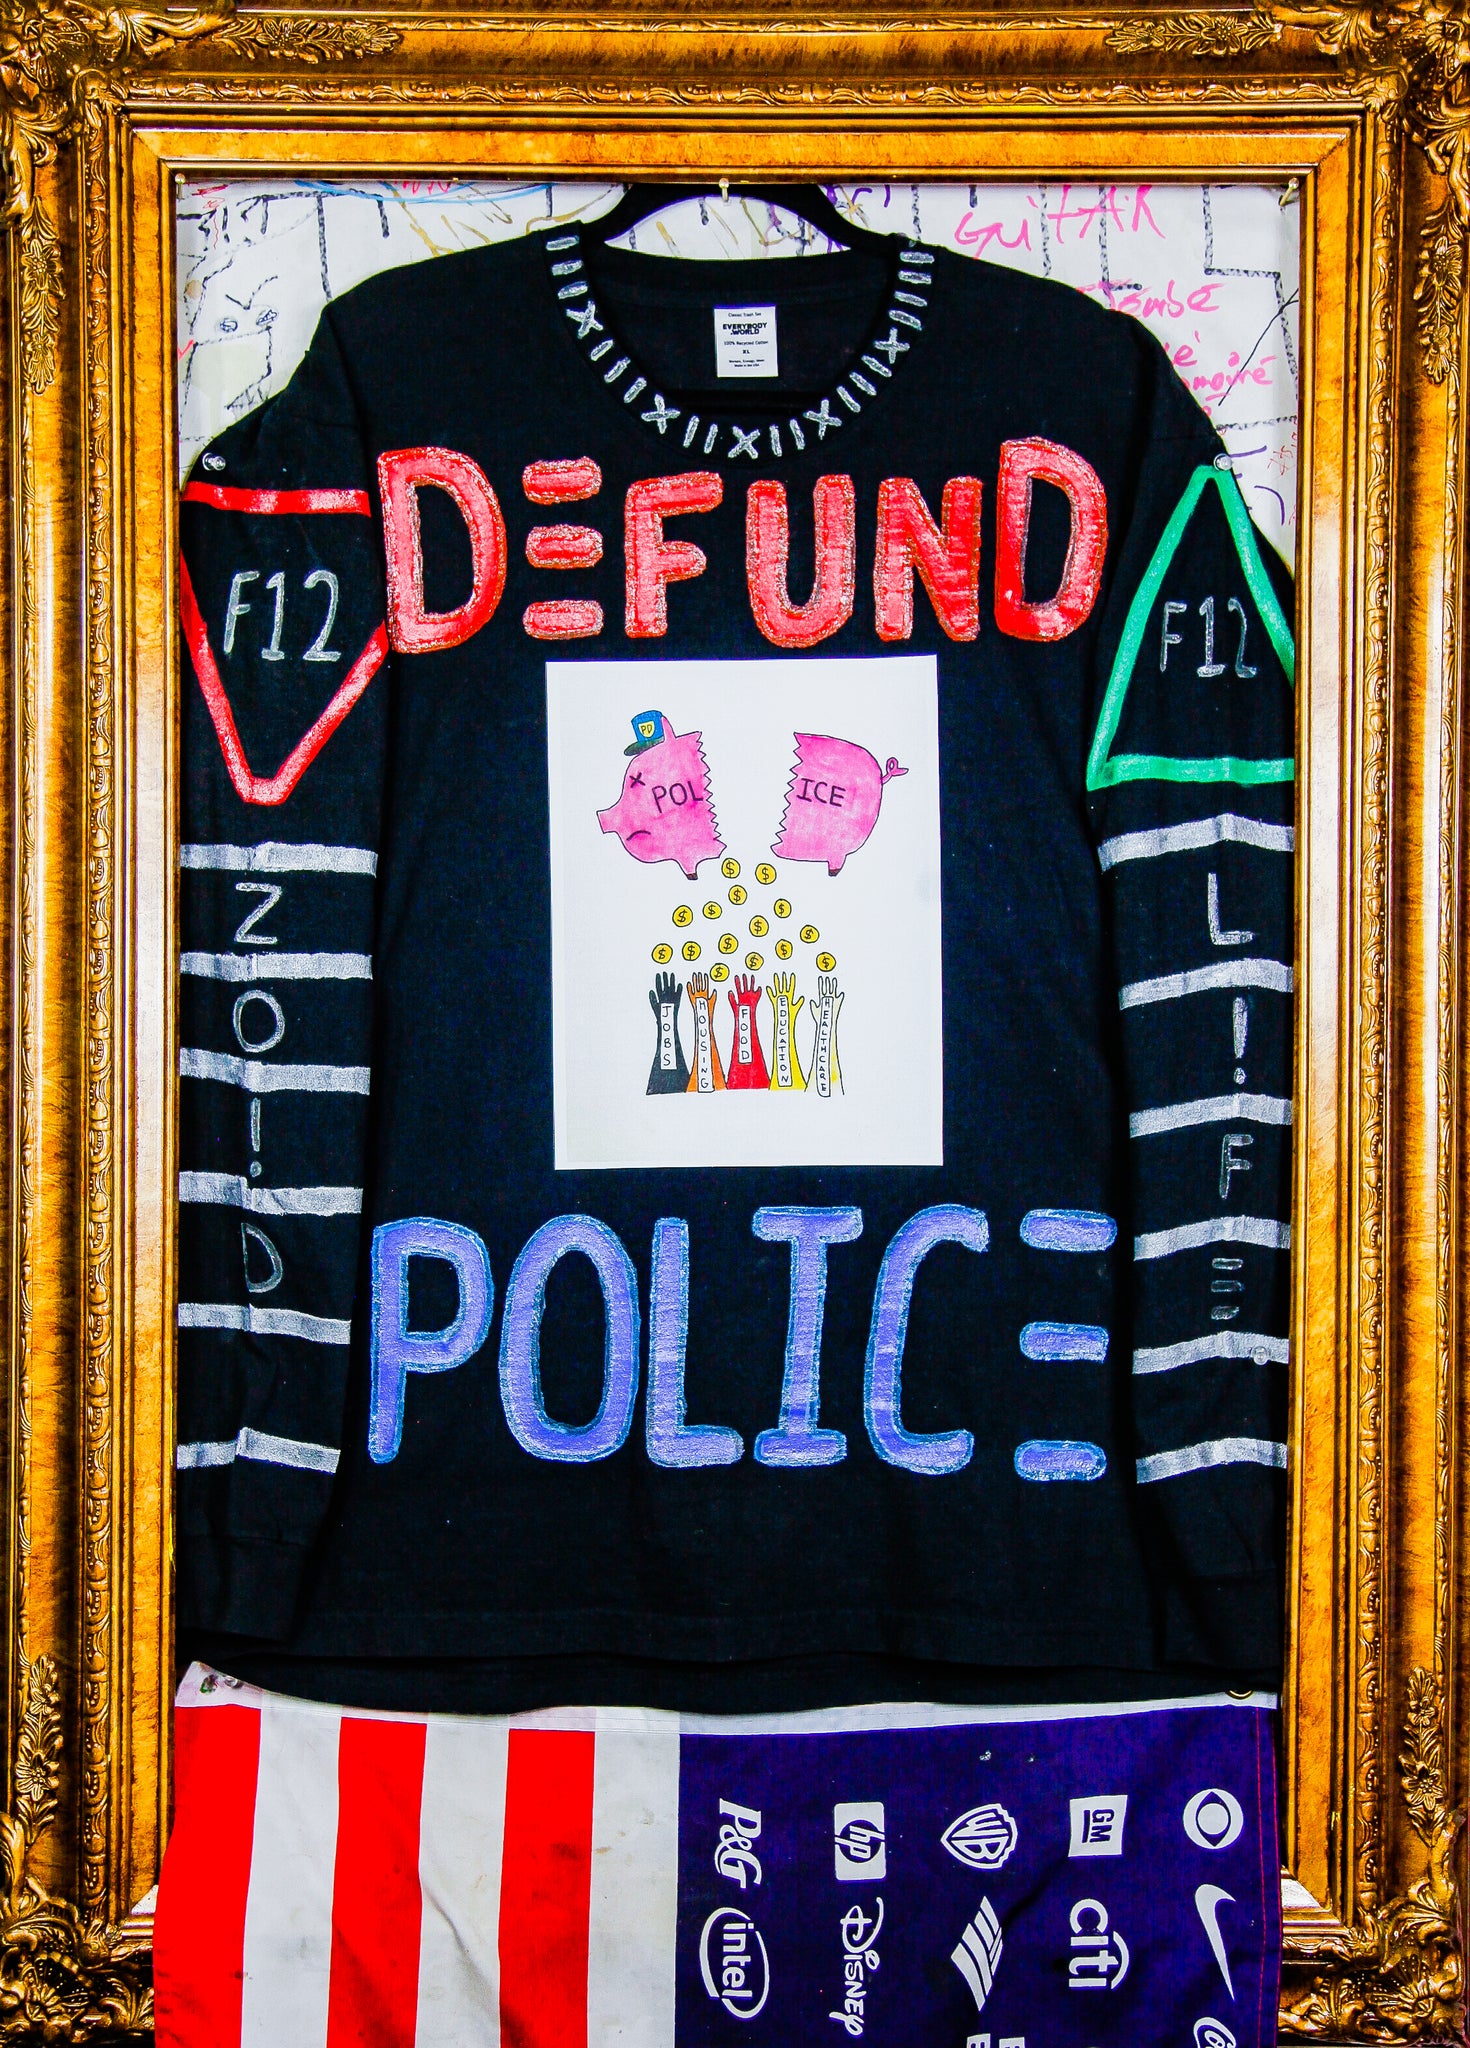 Defund The Police T-Shirt